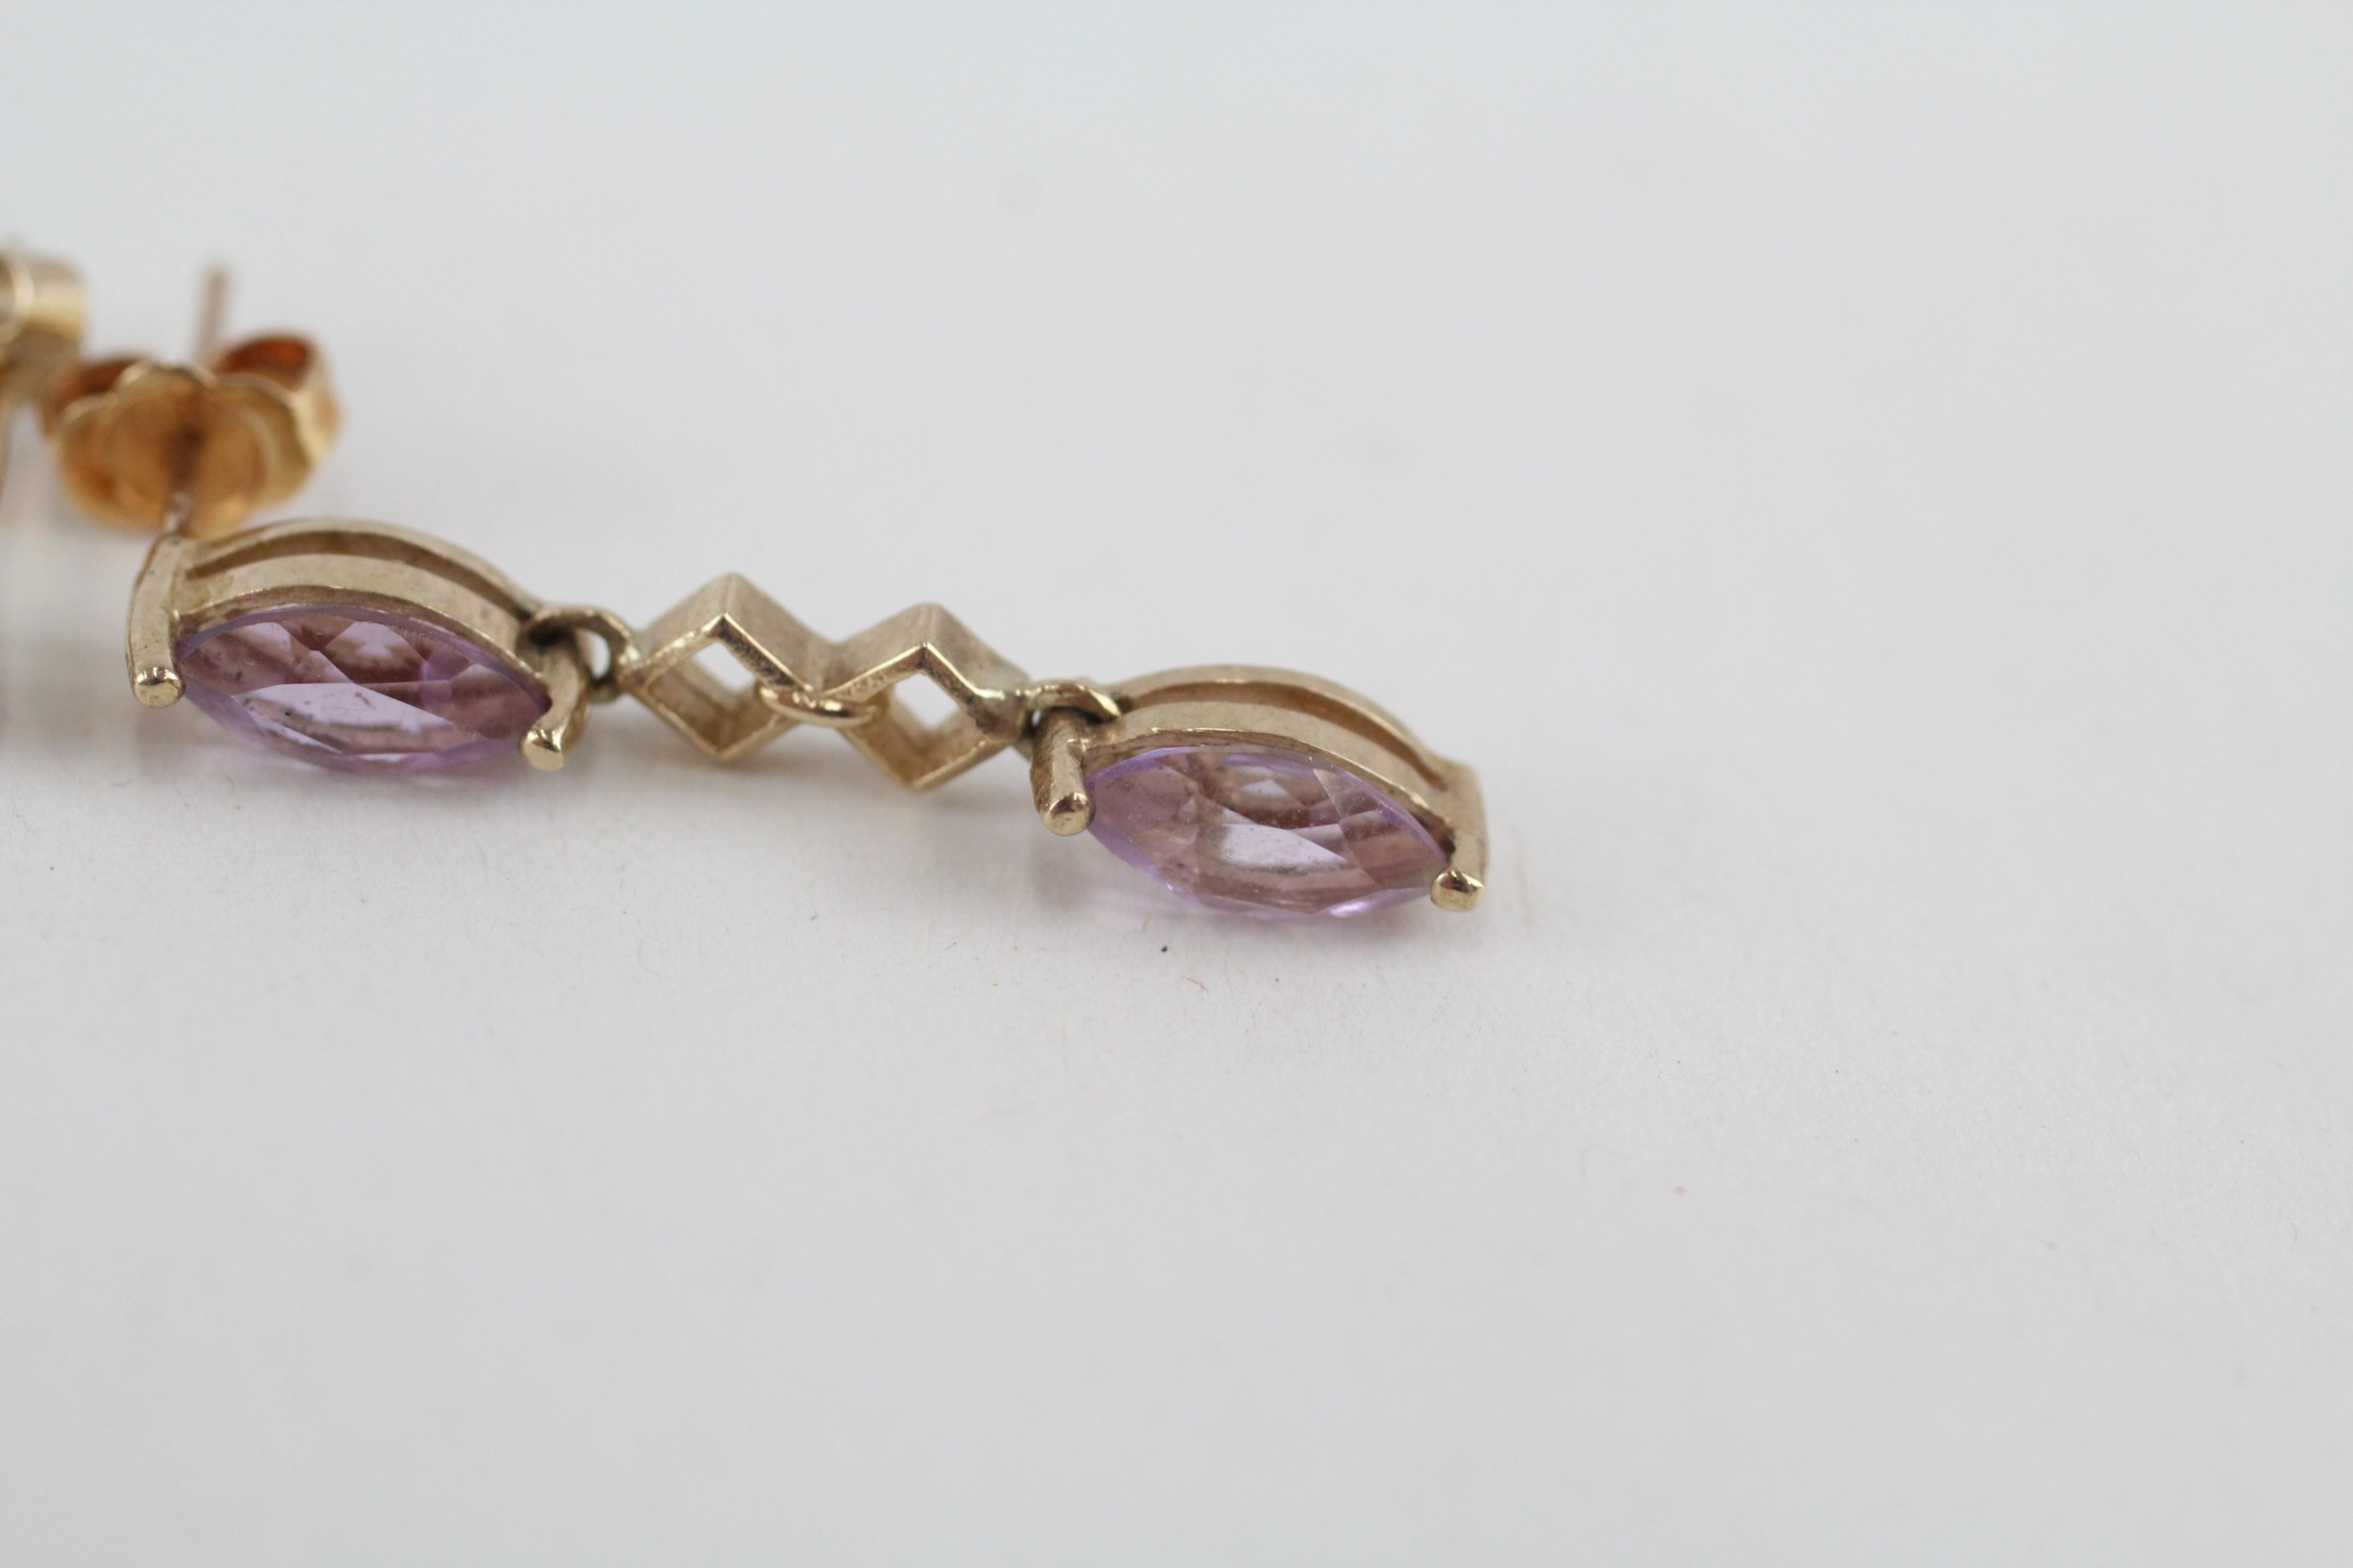 9ct gold marquise cut amethyst drop earrings (2.4g) - Image 4 of 4